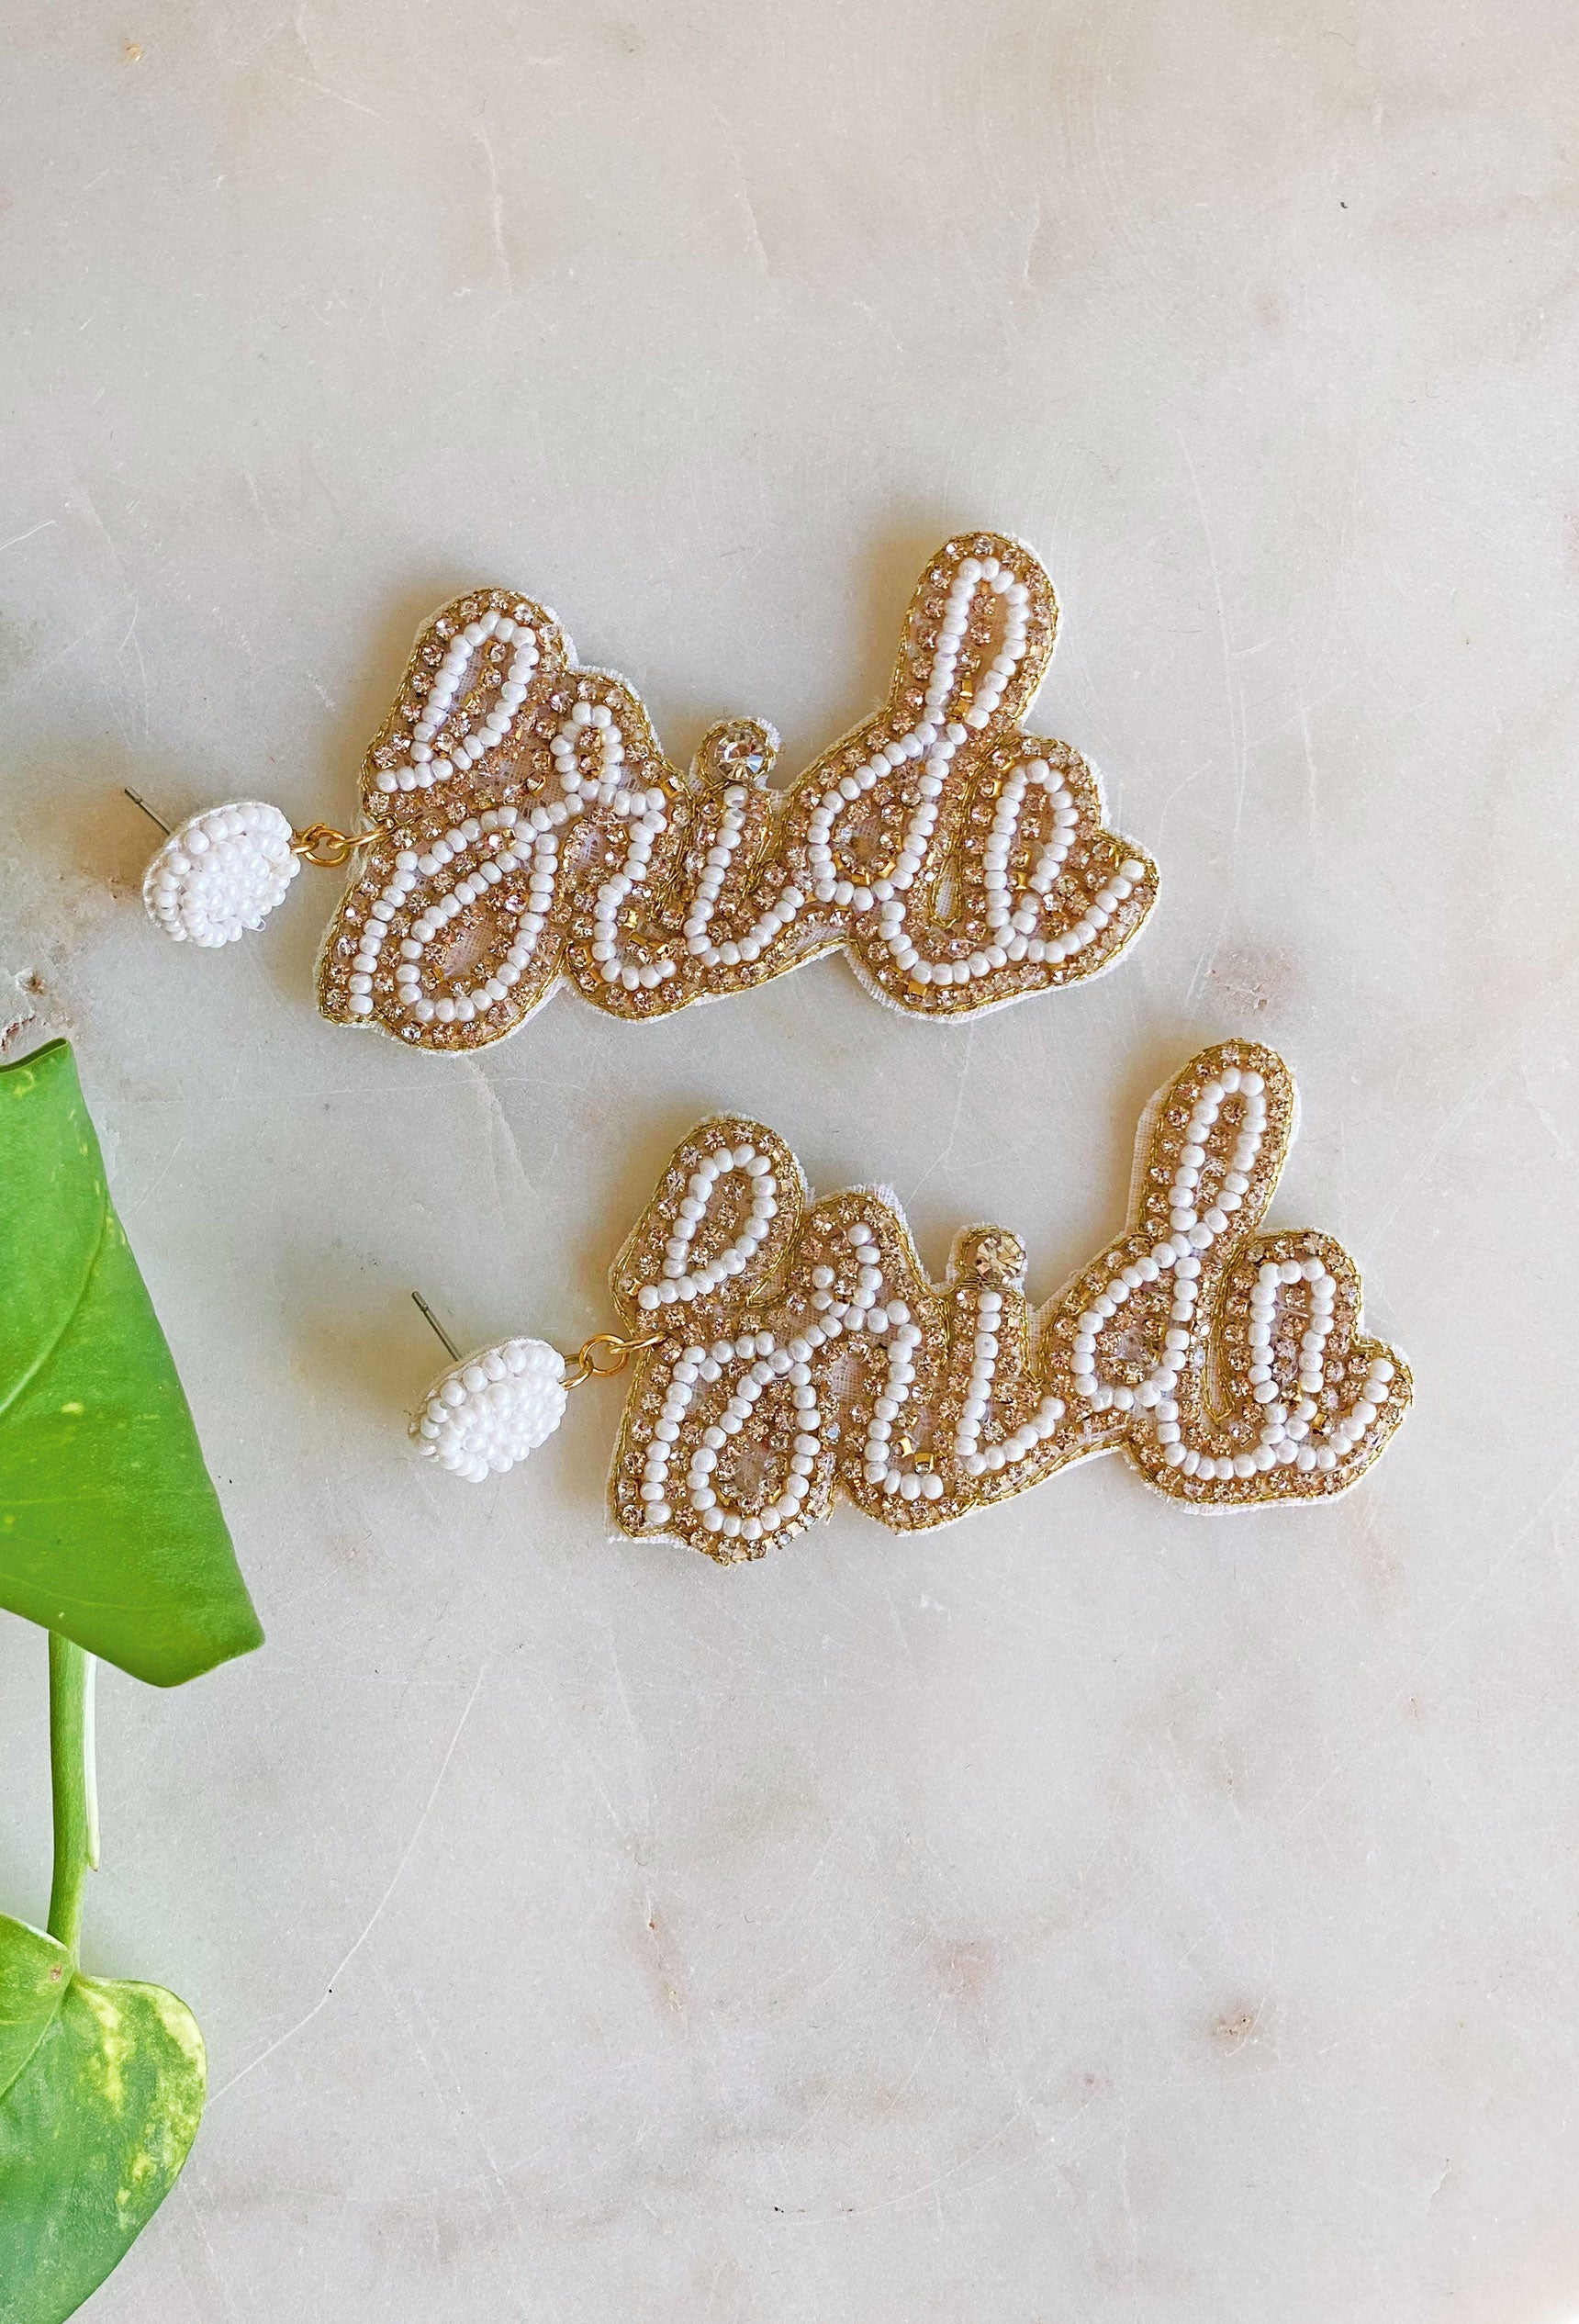 Bride Cursive Beaded Earrings, cursive writing and sparkly detailing